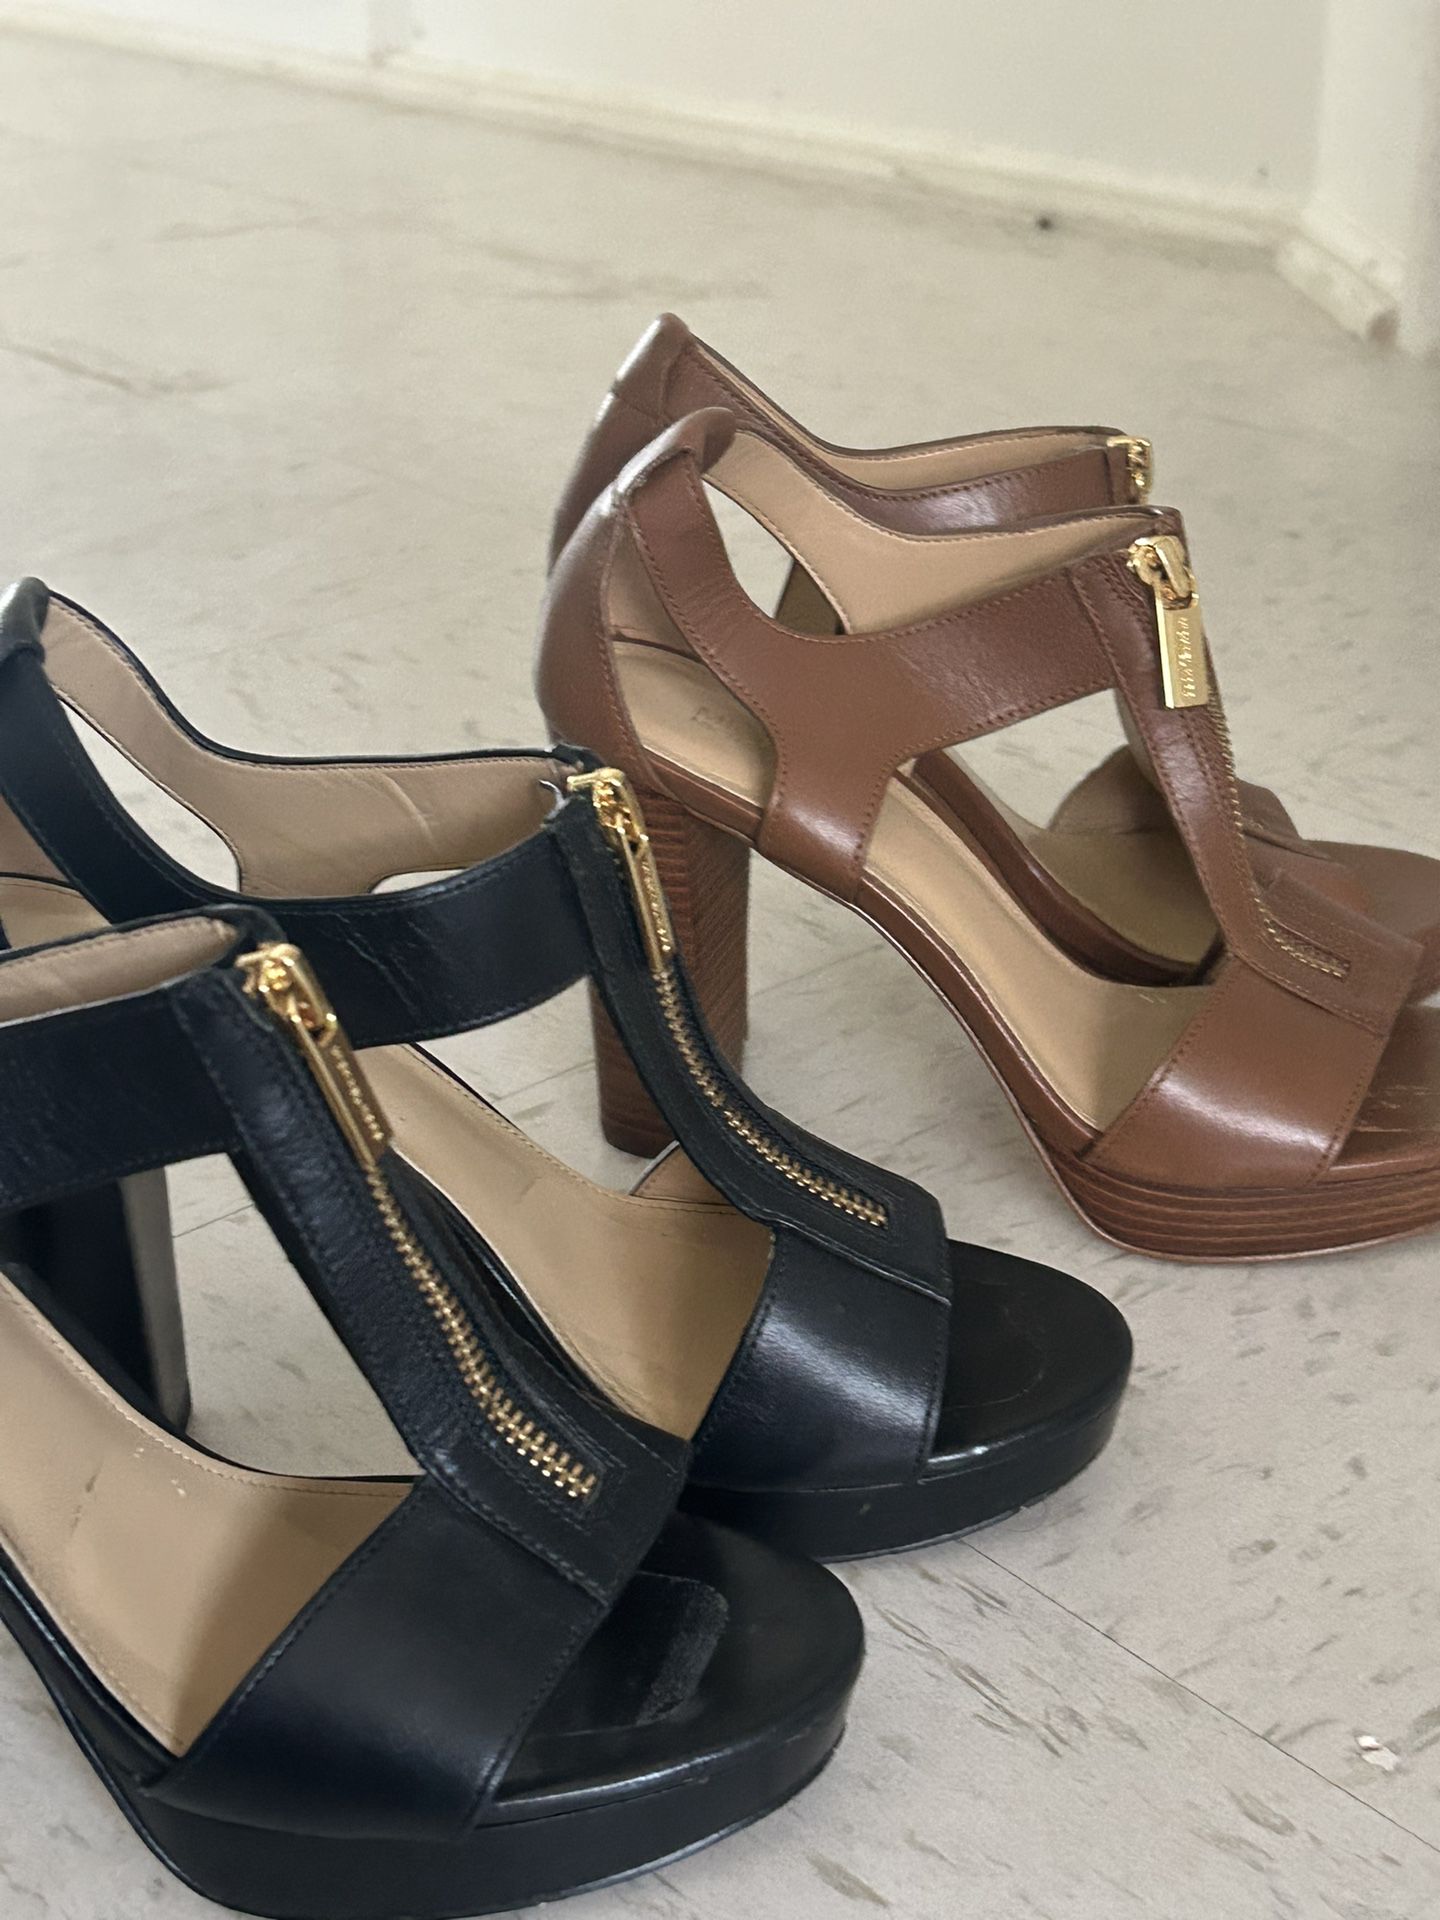 2 pairs of Michael Kors, size 6, black and light brown 